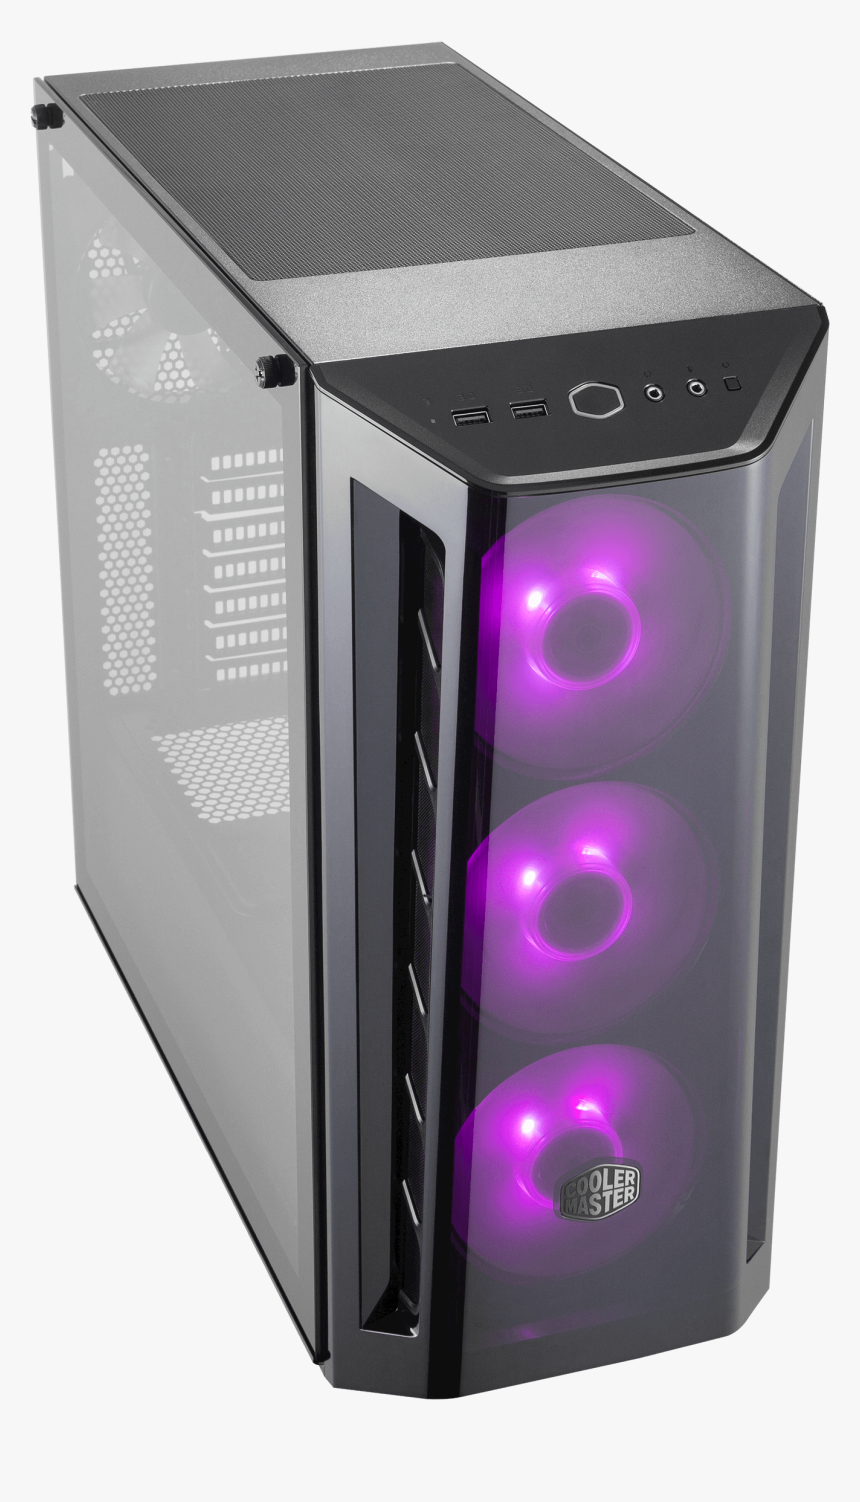 Cooler Master Masterbox Mb520 Review, HD Png Download, Free Download